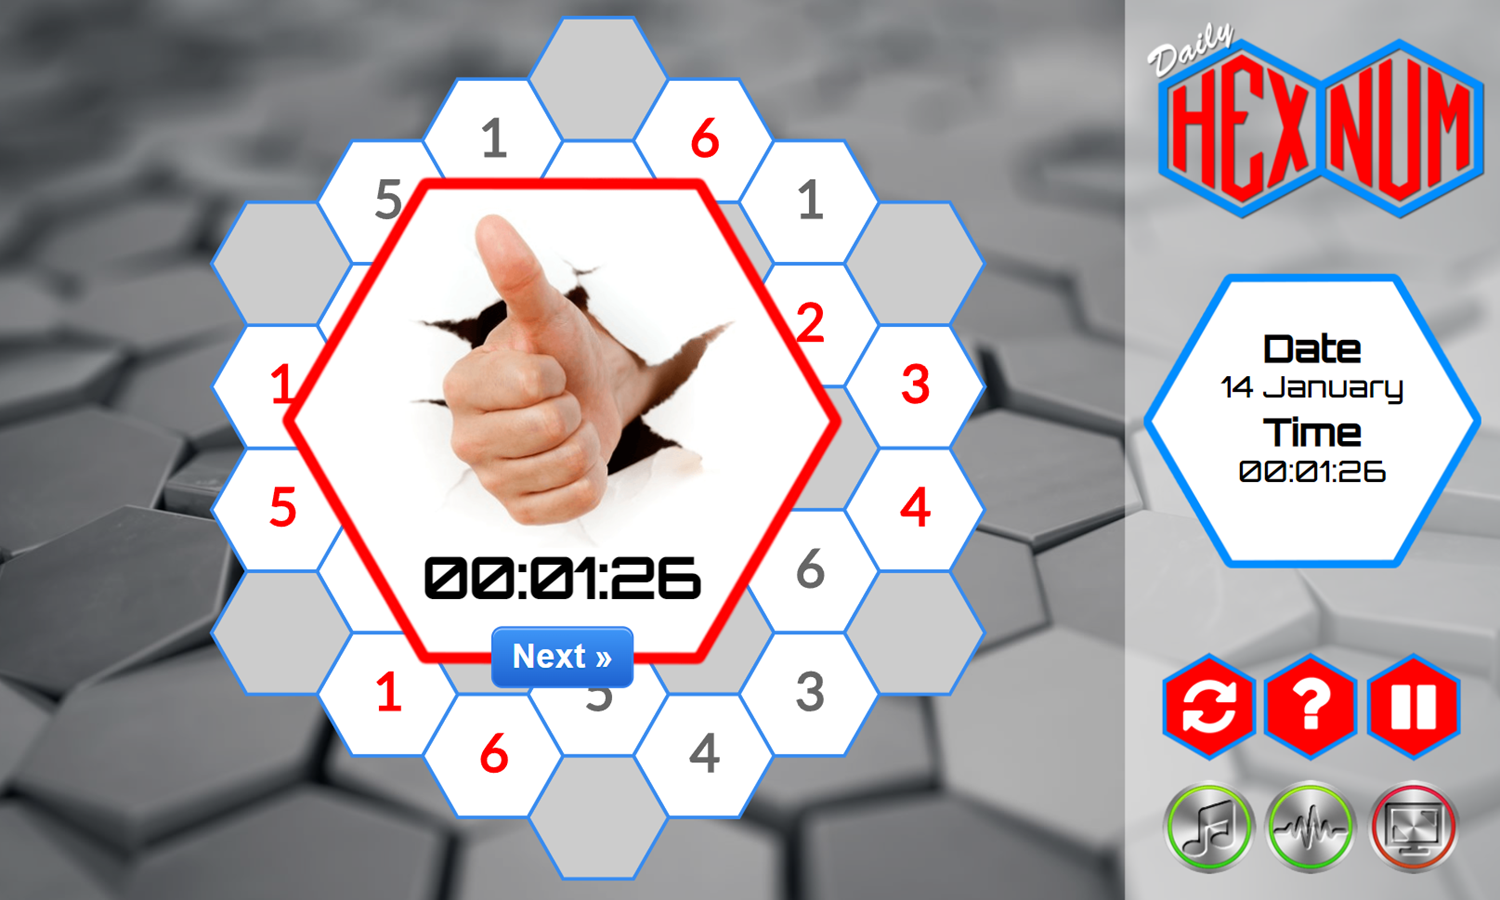 Daily Hex Num Game Complete Screenshot.